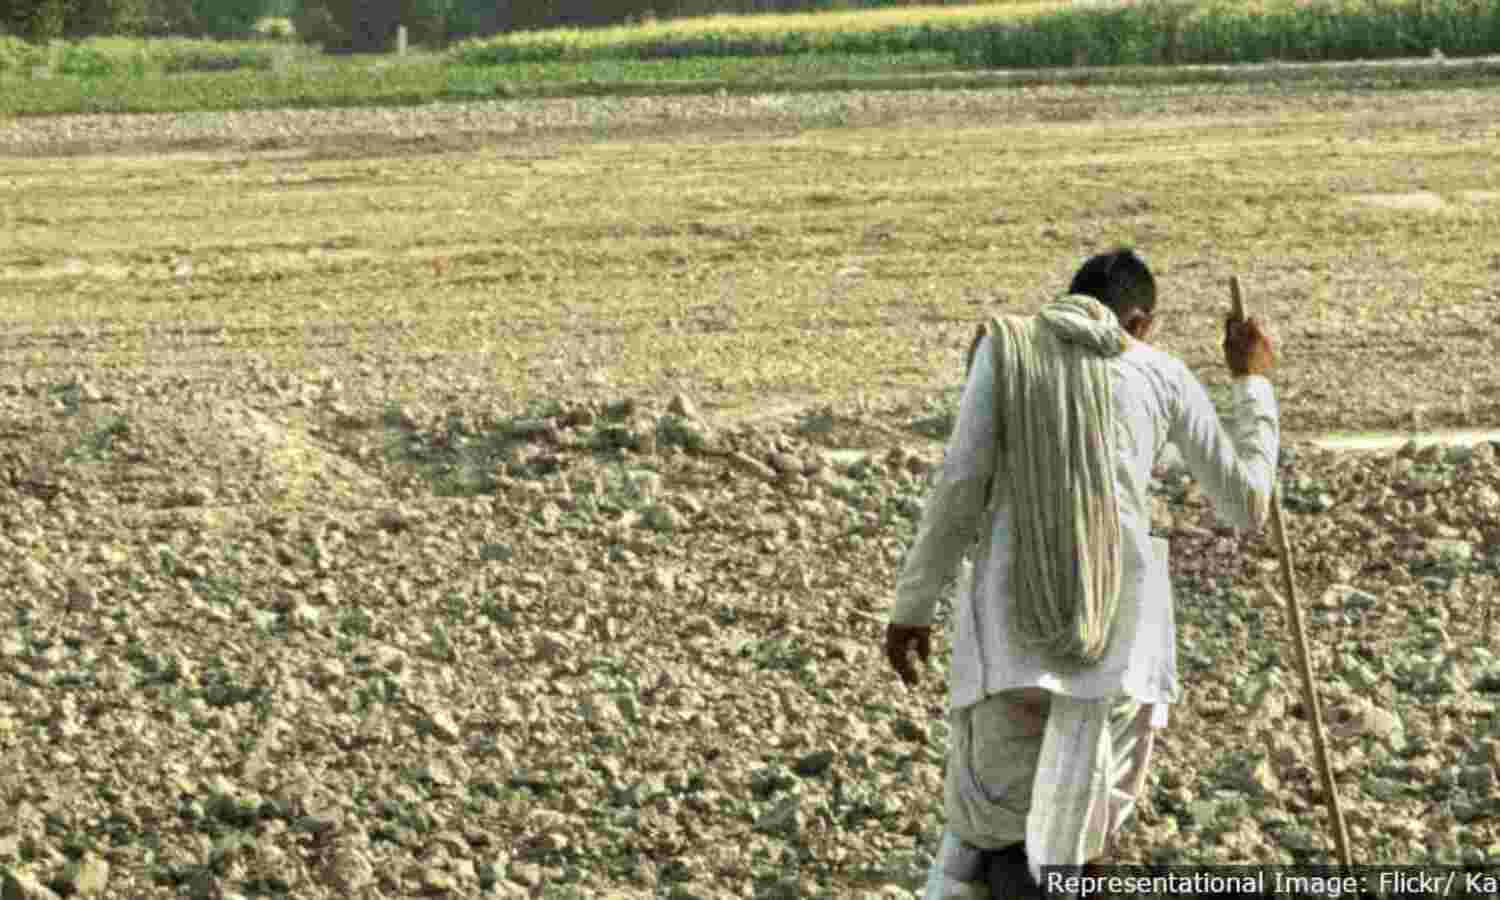 With A 'Normal' Monsoon Set To Depart, Drought-Like Conditions In 37%  Districts In India